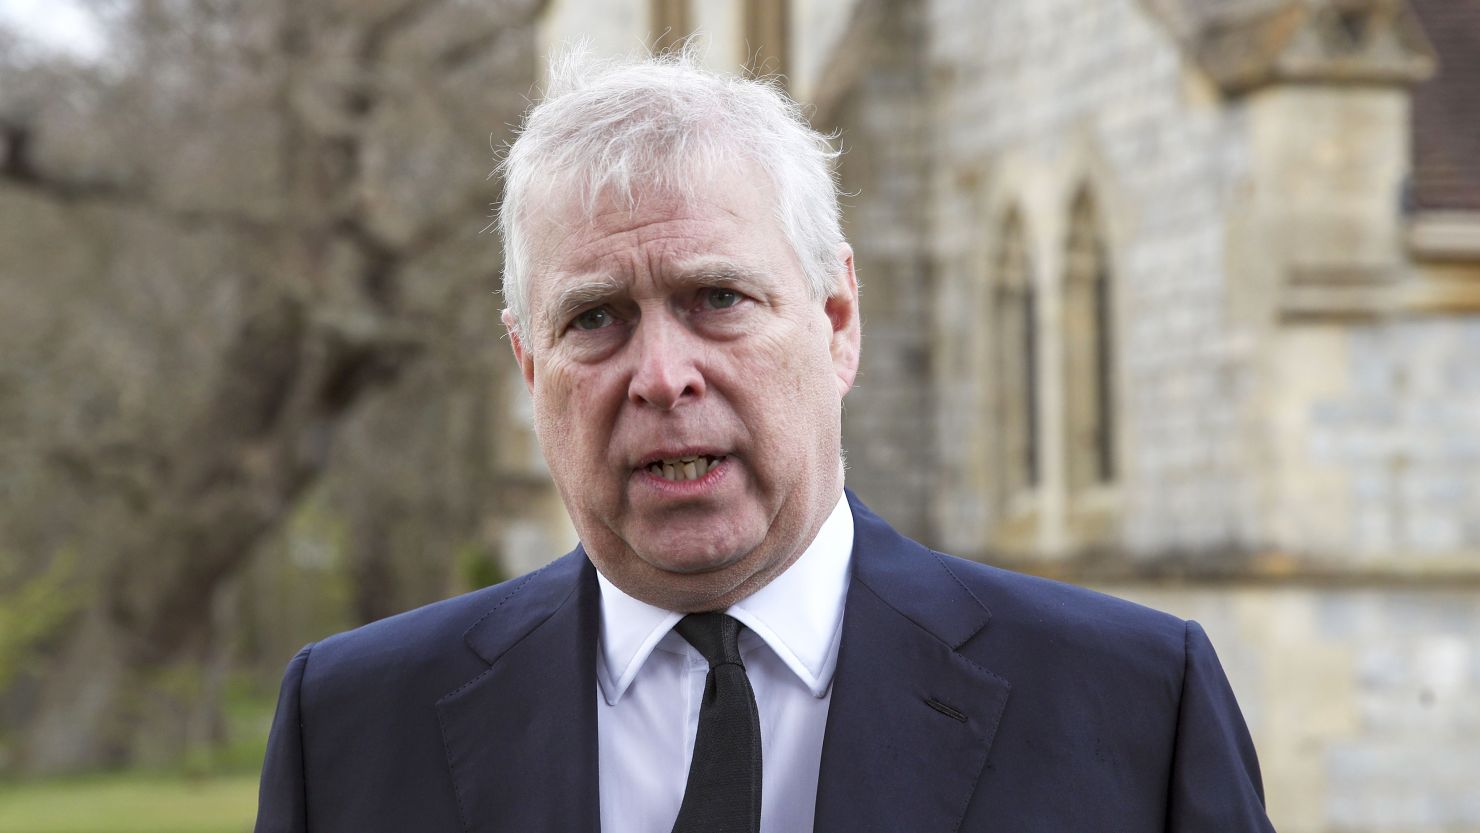 Prince Andrew, Duke of York, stepped back from royal duties in late 2019.